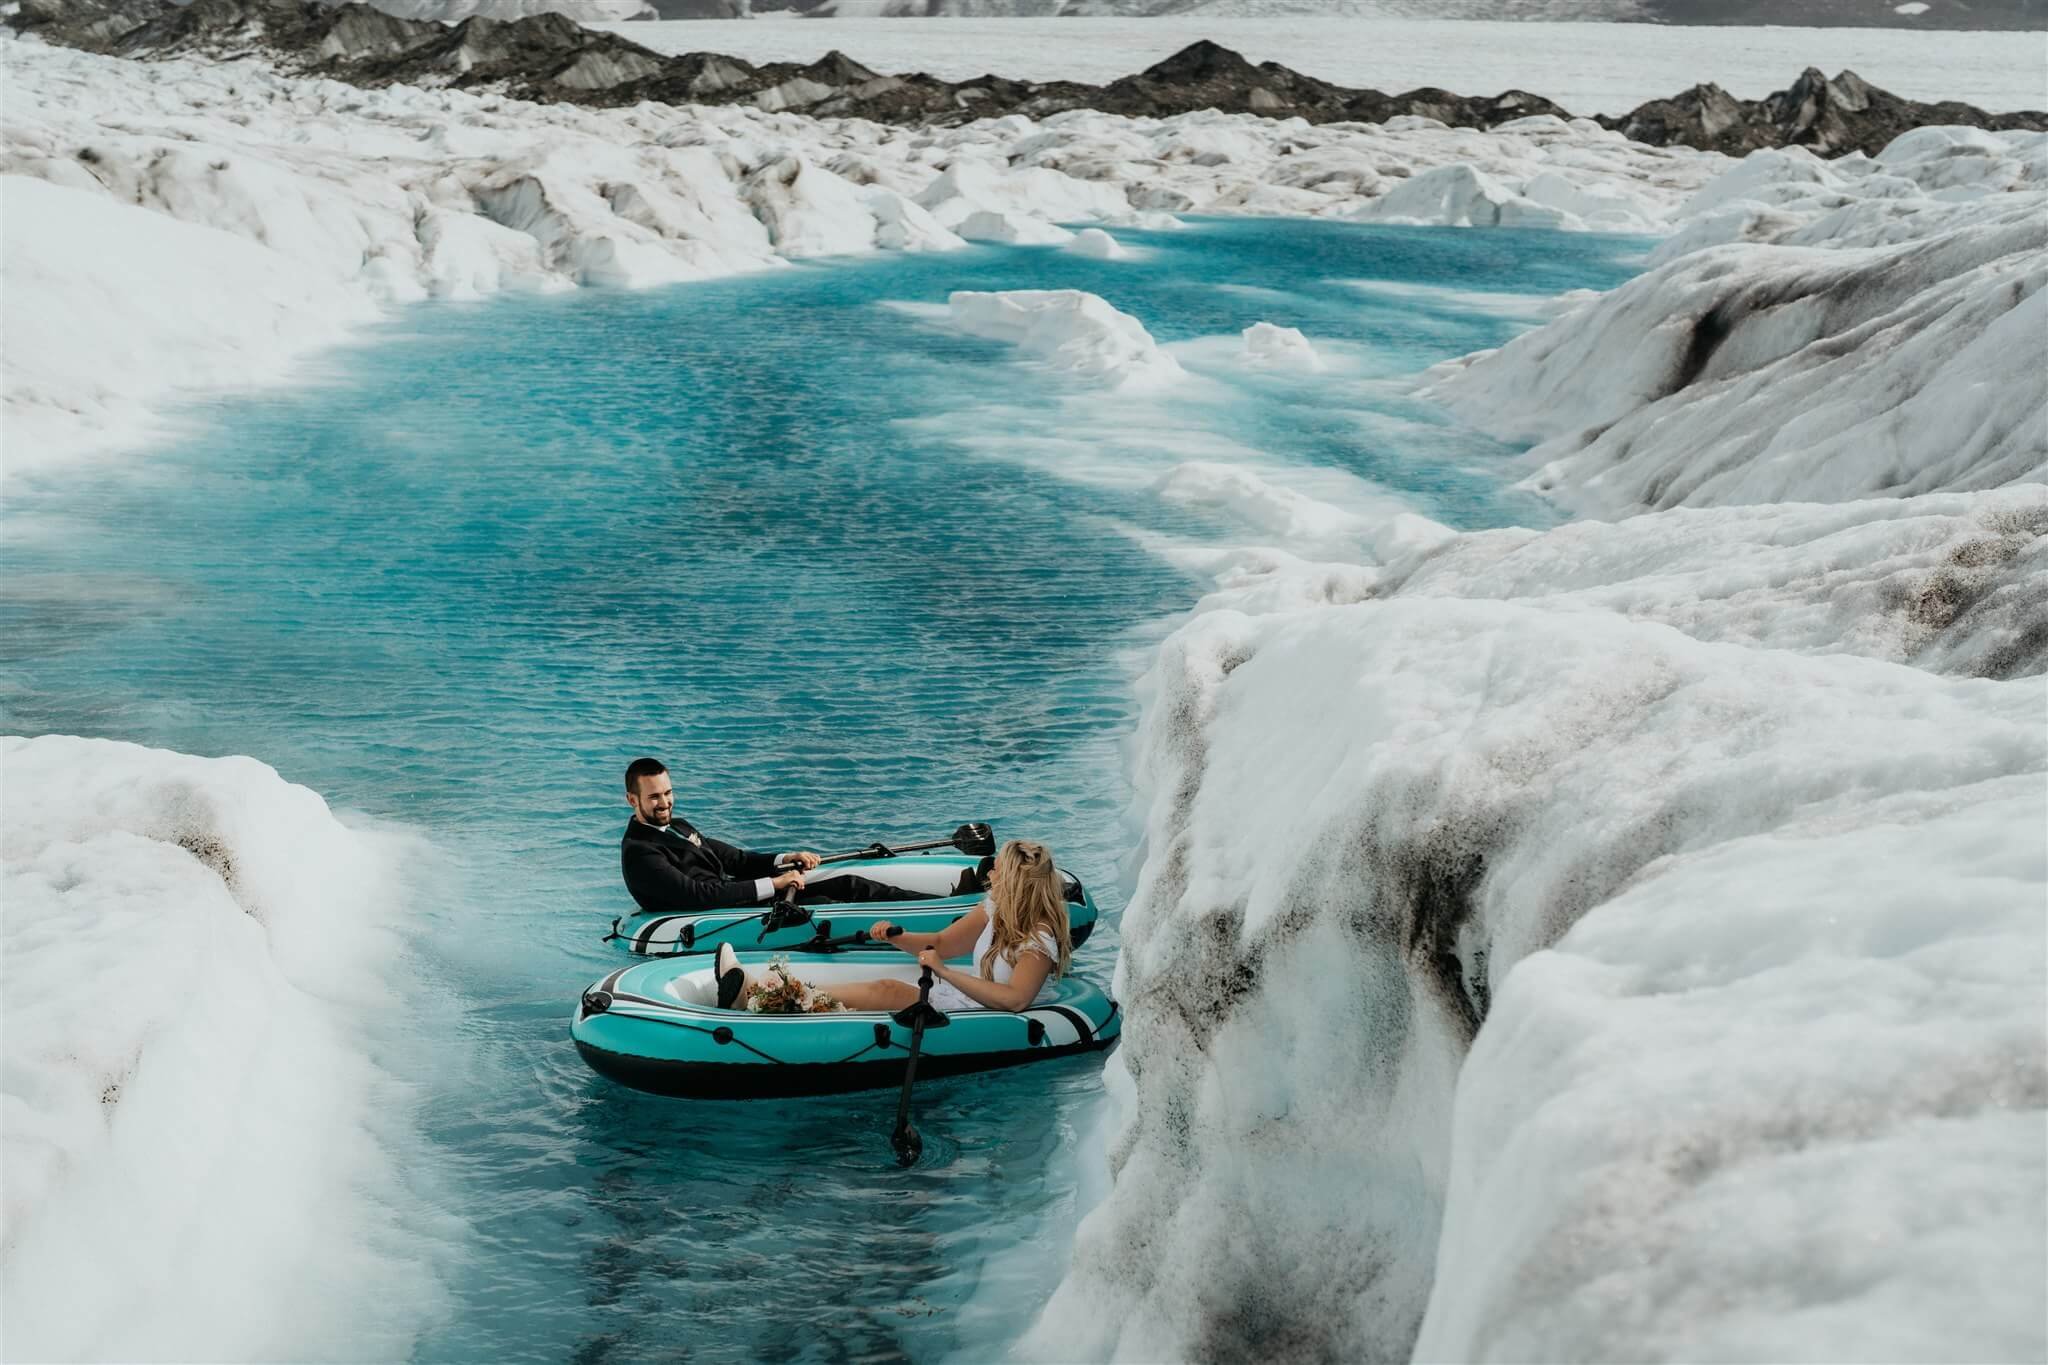 Bride and groom paddle inflatable boats on a glacier pond in Alaska